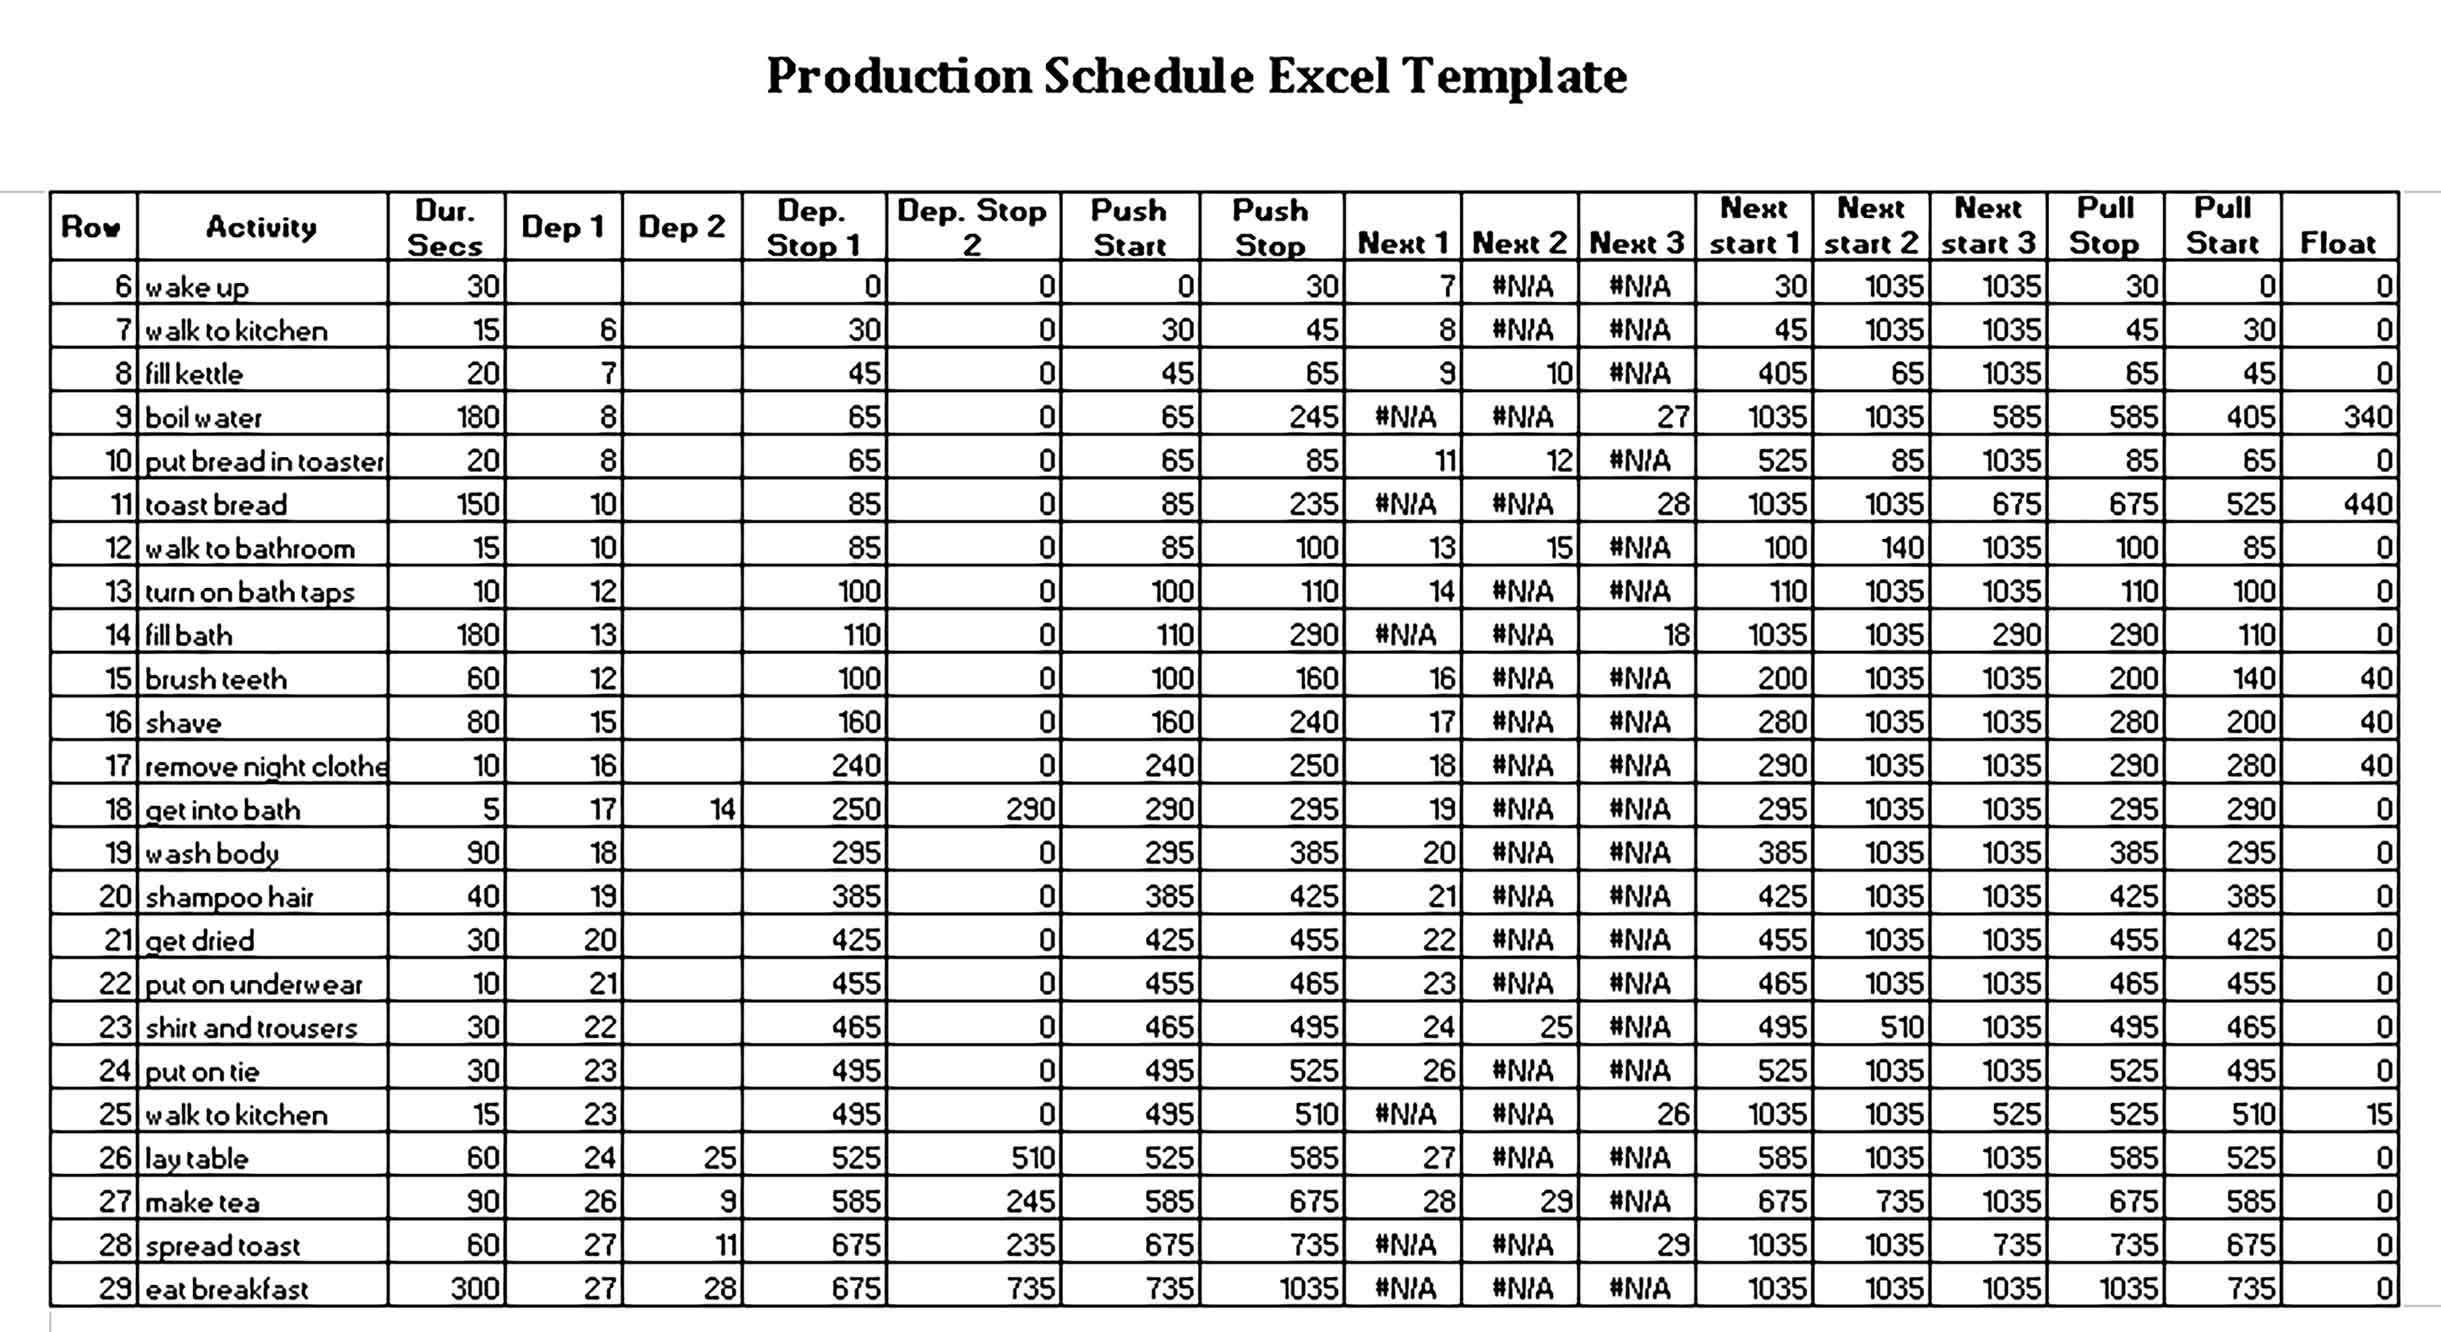 Template production schedule Sample 002